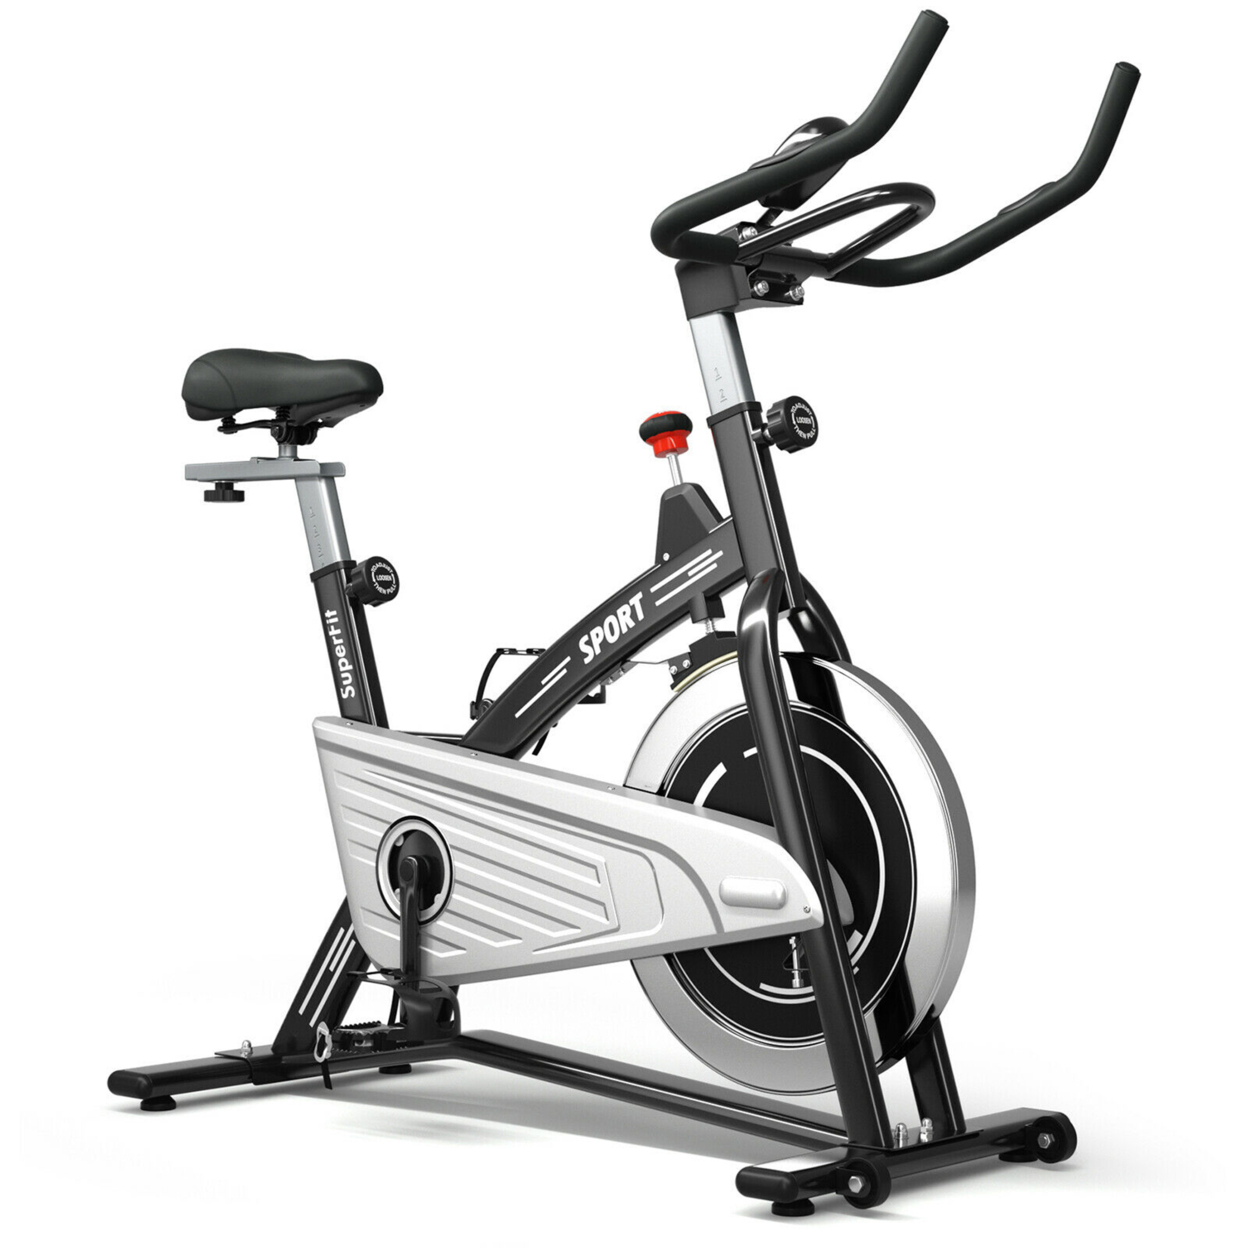 Gymax 30Lbs Stationary Training Bike Exercising Bicycle W/Monitor Gym